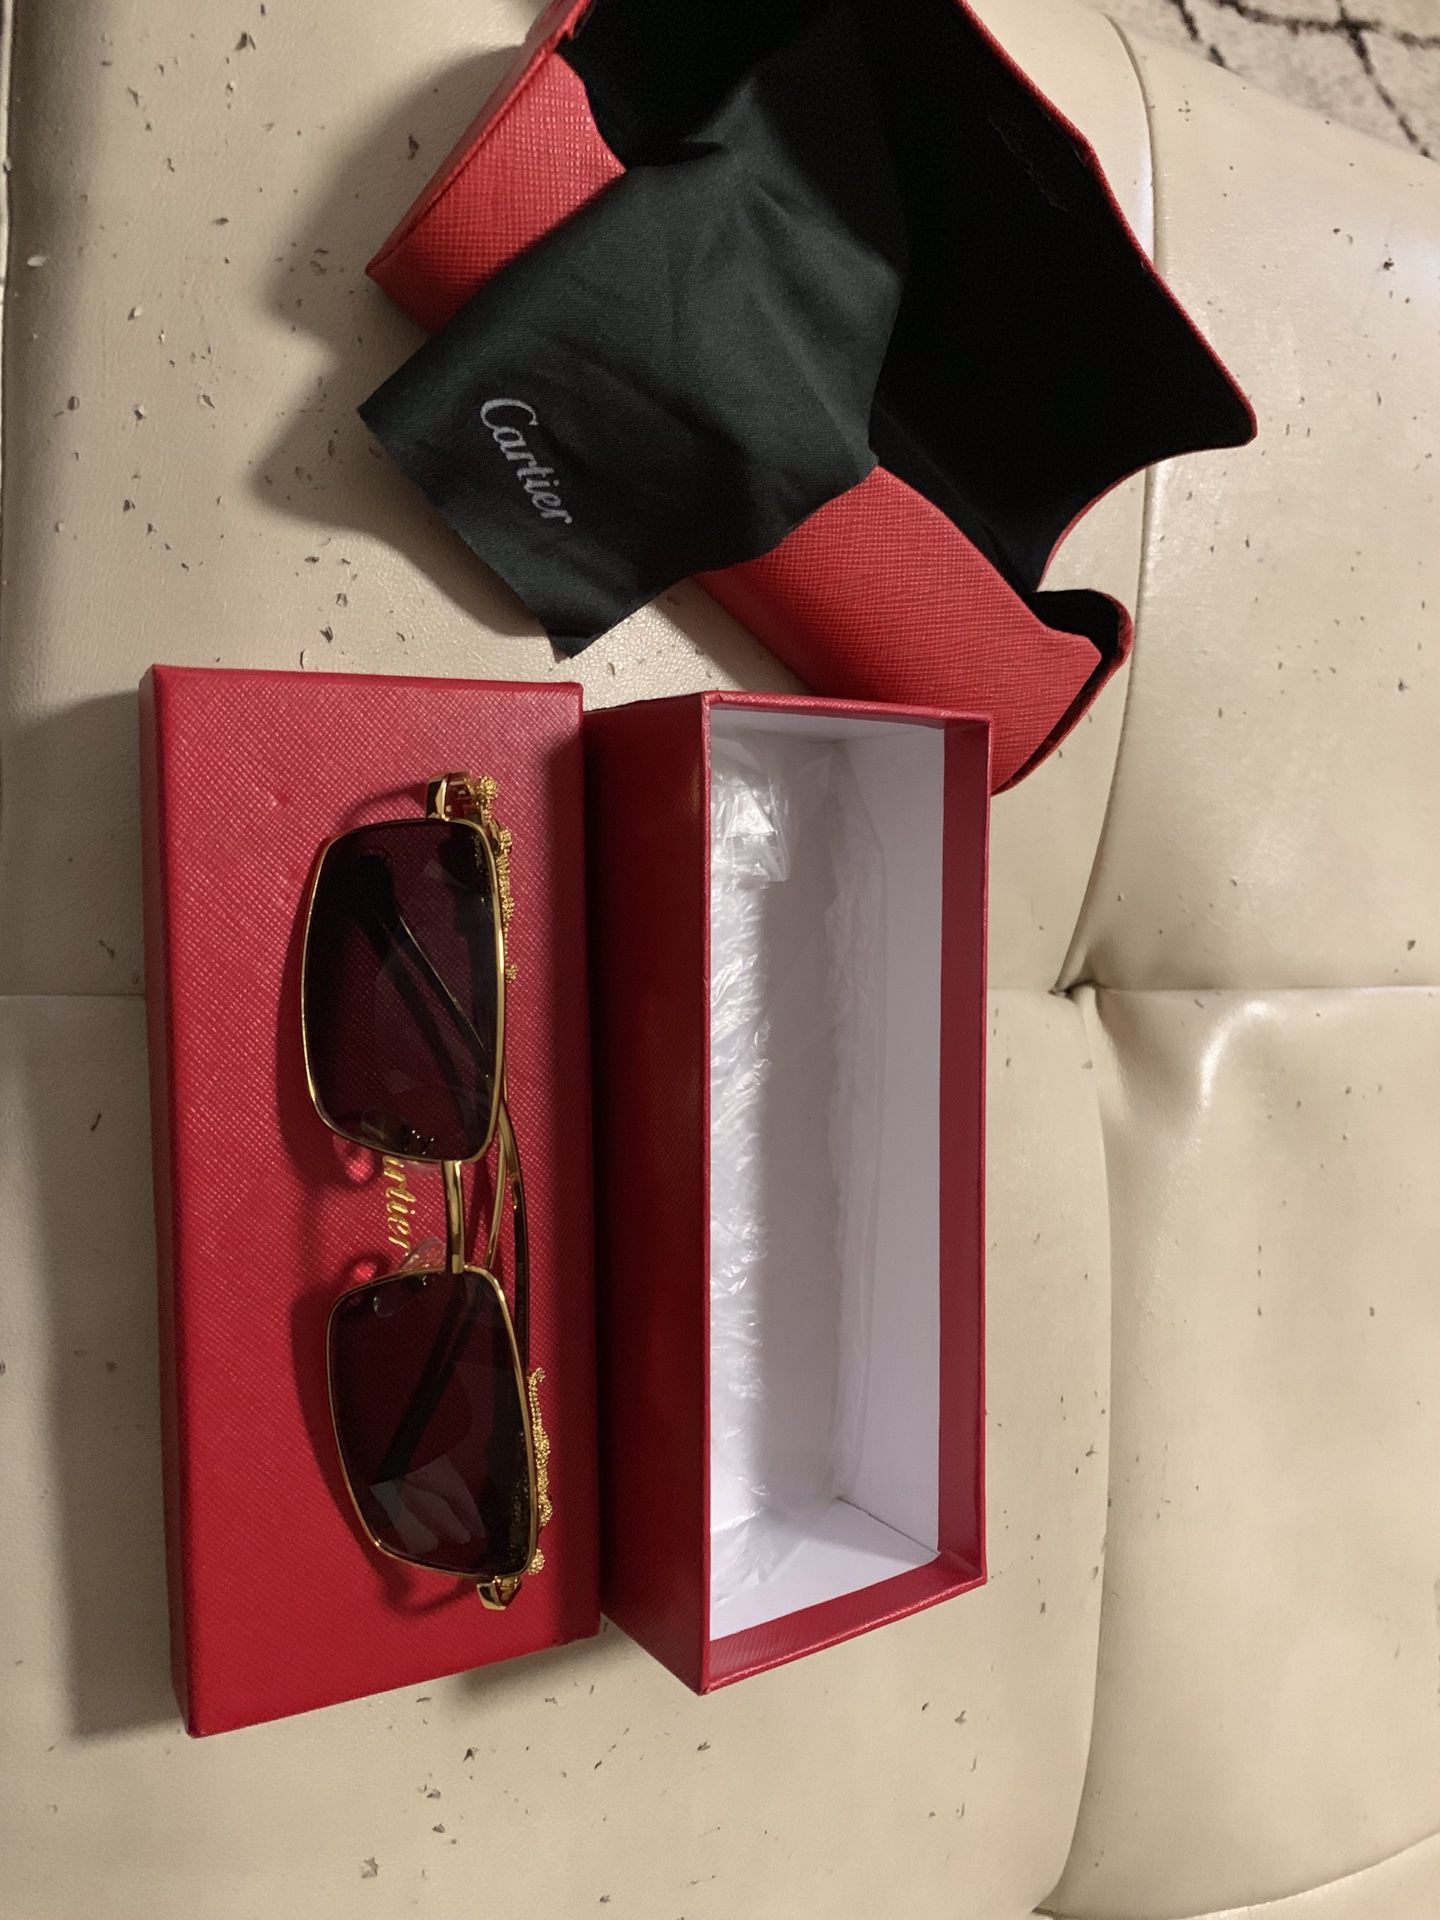 CARTIER SUNGLASSES PANTHERÈ COLLECTION COMES WITH BOX and GLASS WIPE